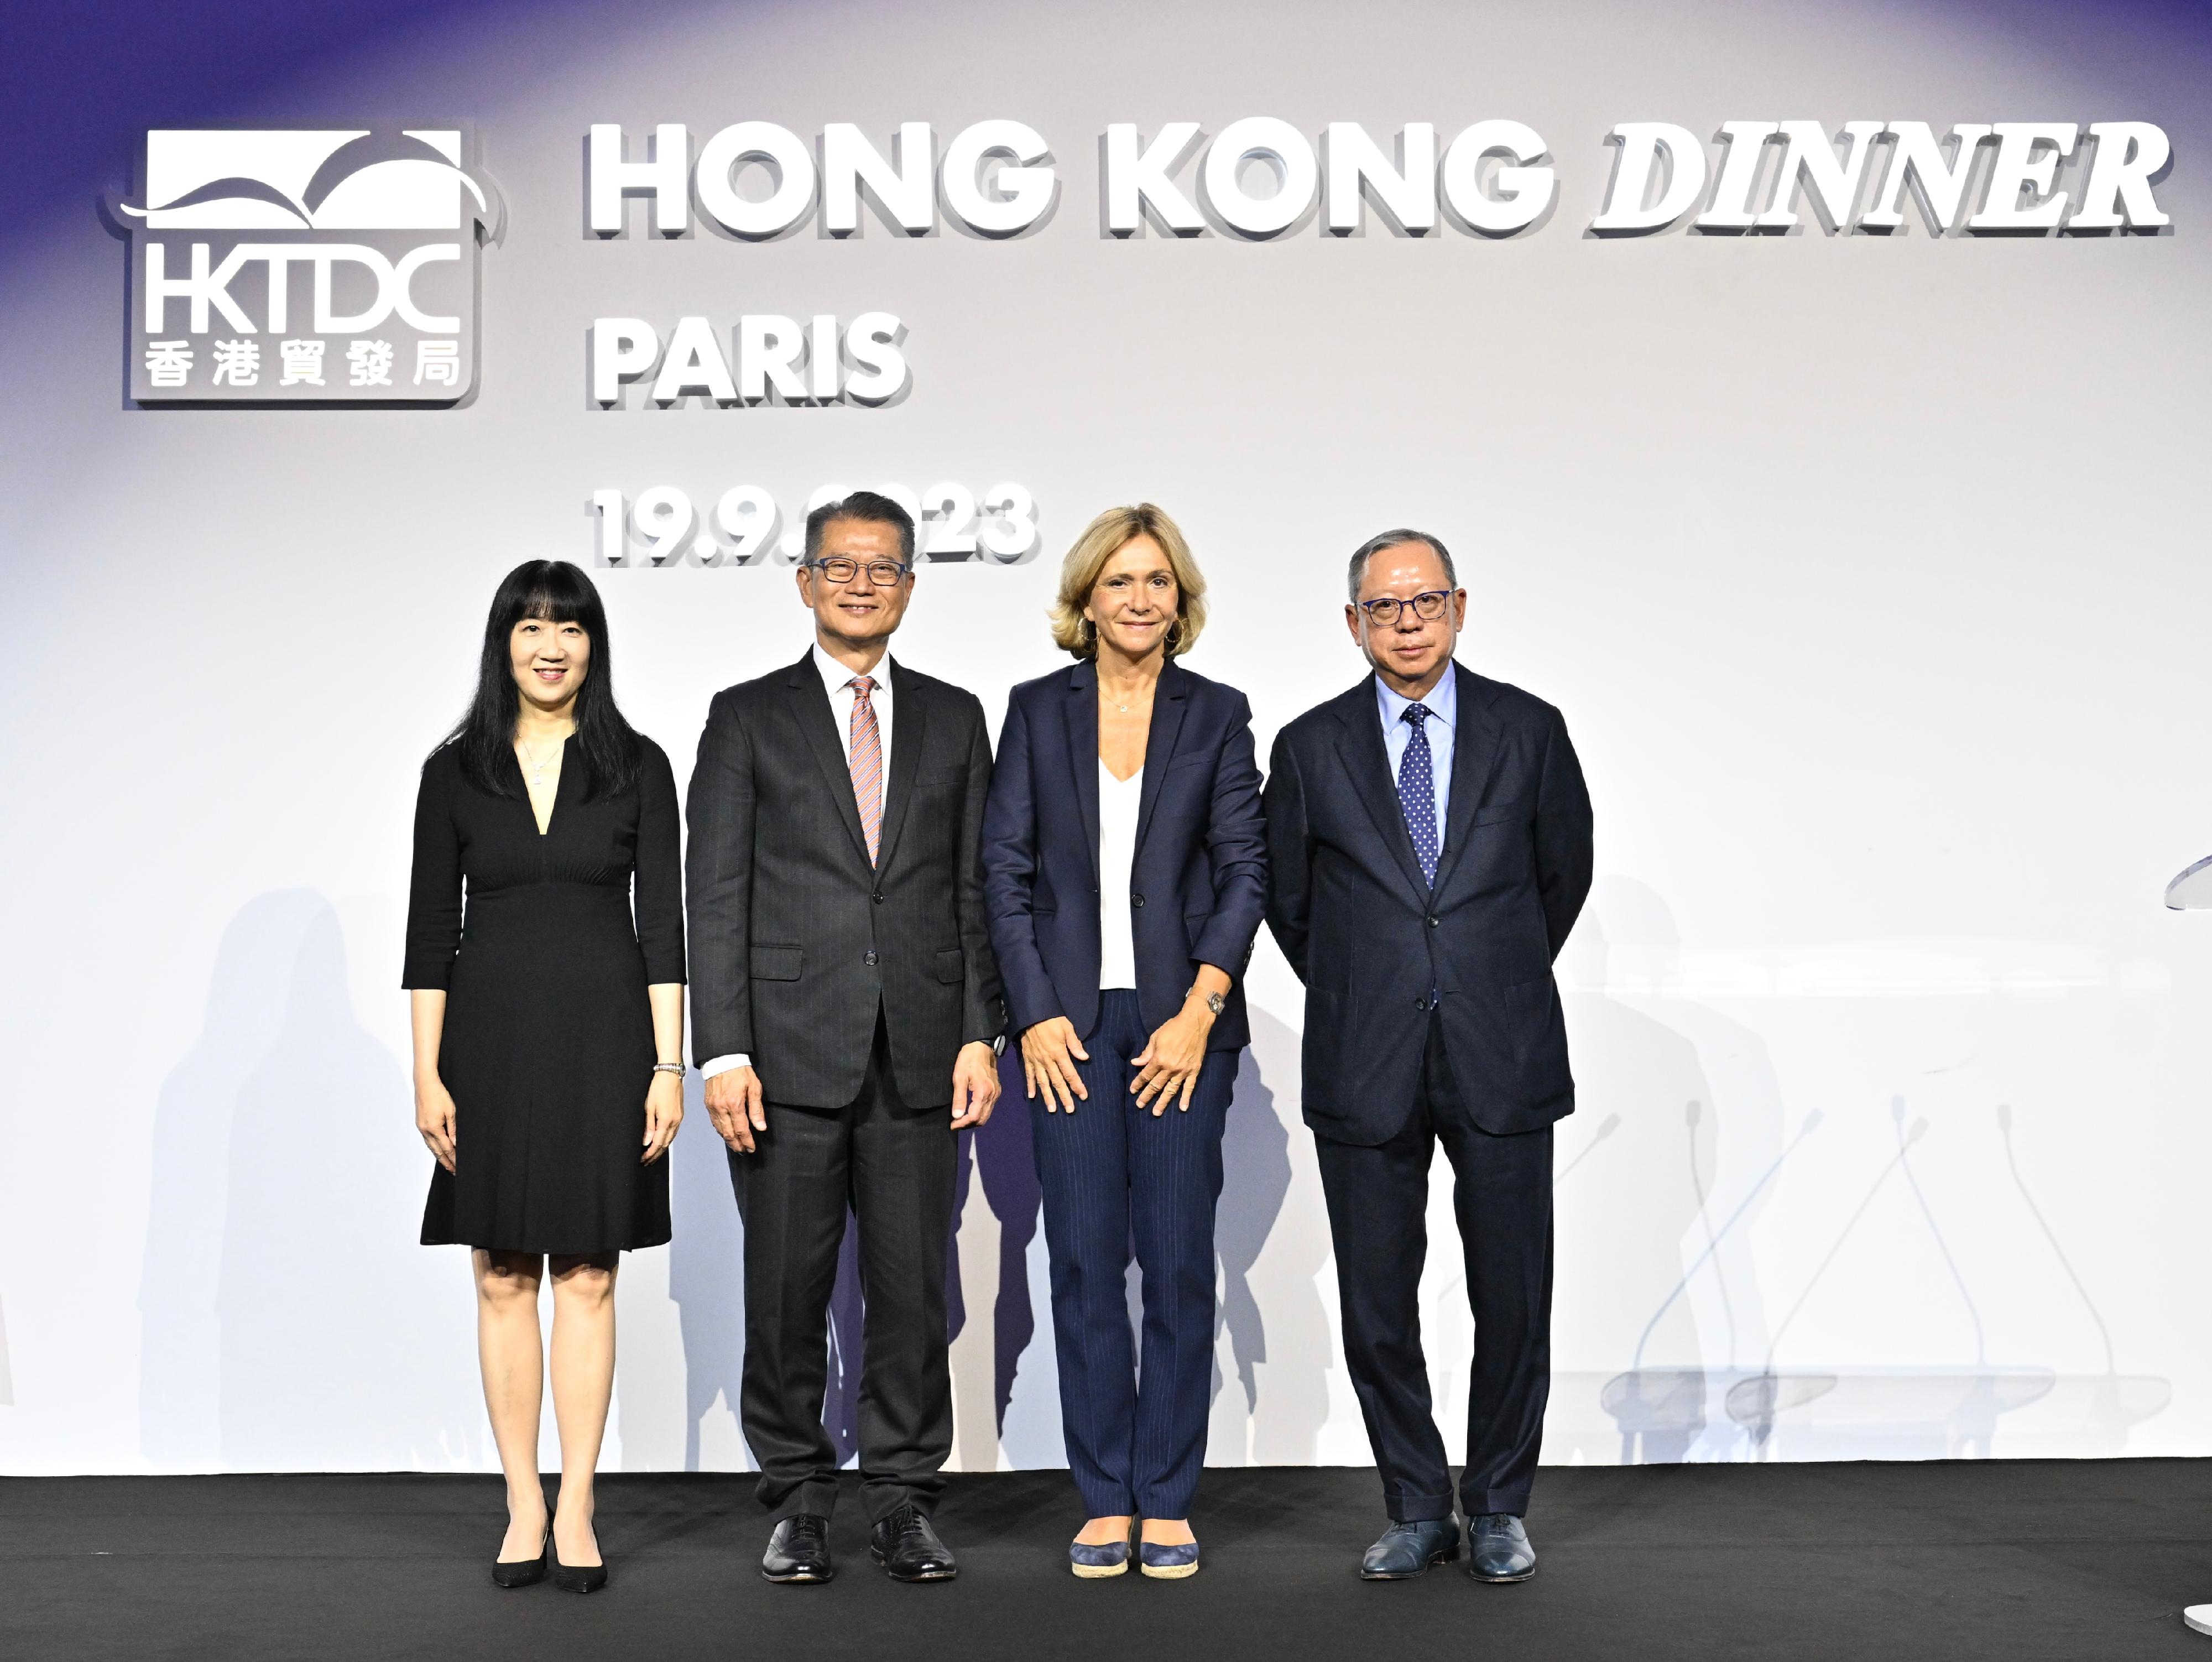 The Financial Secretary, Mr Paul Chan, continued to visit Paris, France, yesterday (September 19, Paris time). Photo shows Mr Chan (second left) attending the Hong Kong Dinner in Paris organised by the Hong Kong Trade Development Council, and pictured with the President of the Ile-de-France region, Mrs Valérie Pécresse (second right); the Chairman of the Hong Kong Trade Development Council, Dr Peter Lam (first right); and the Executive Director of the Hong Kong Trade Development Council, Ms Margaret Fong (first left).